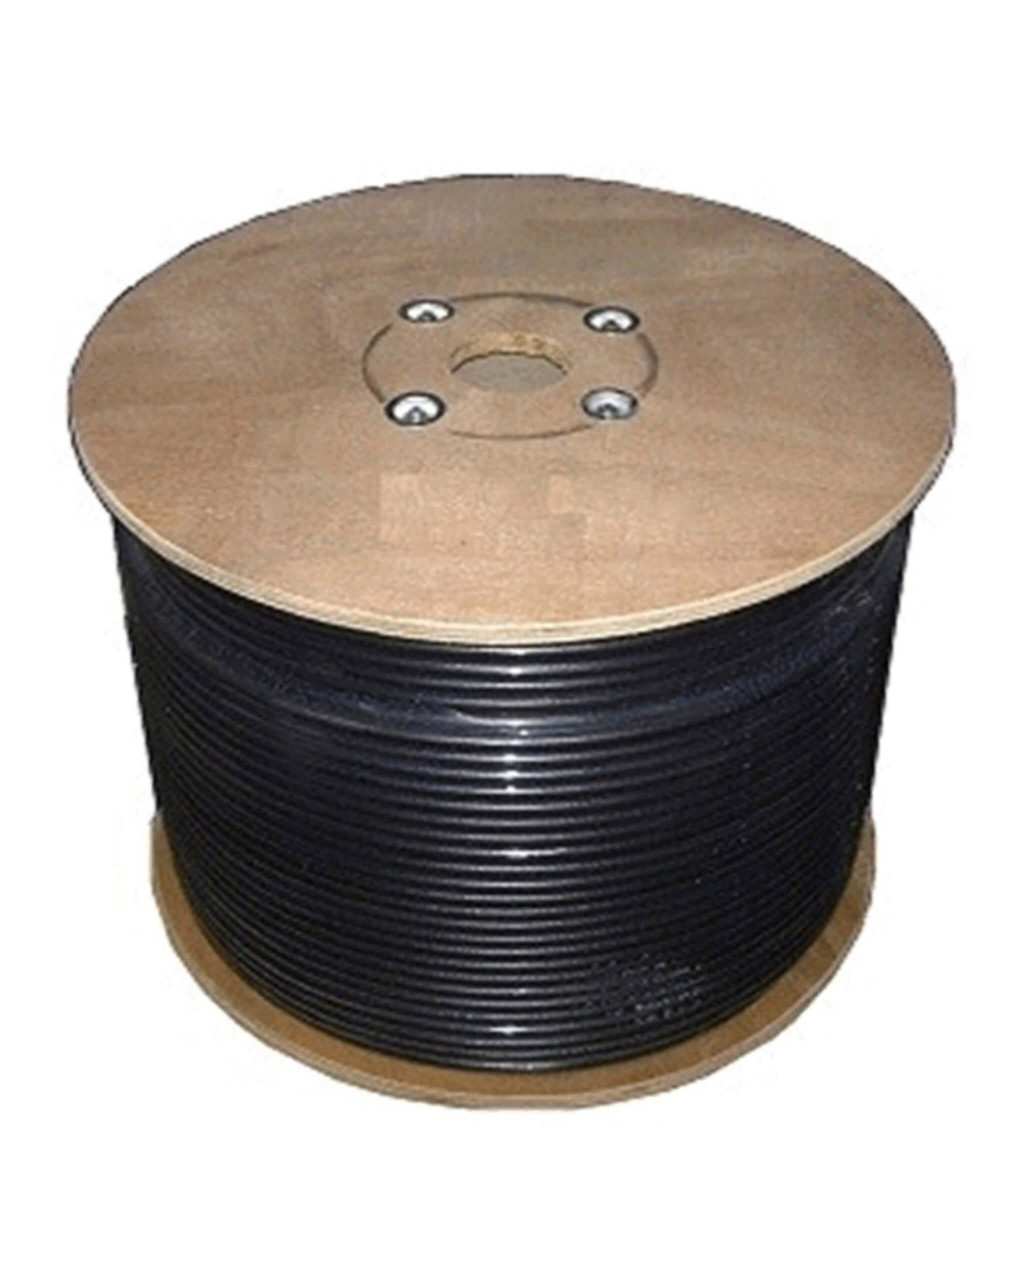 Bolton 600 Low Loss Cable - PE Black Jacket Priced Per Meter